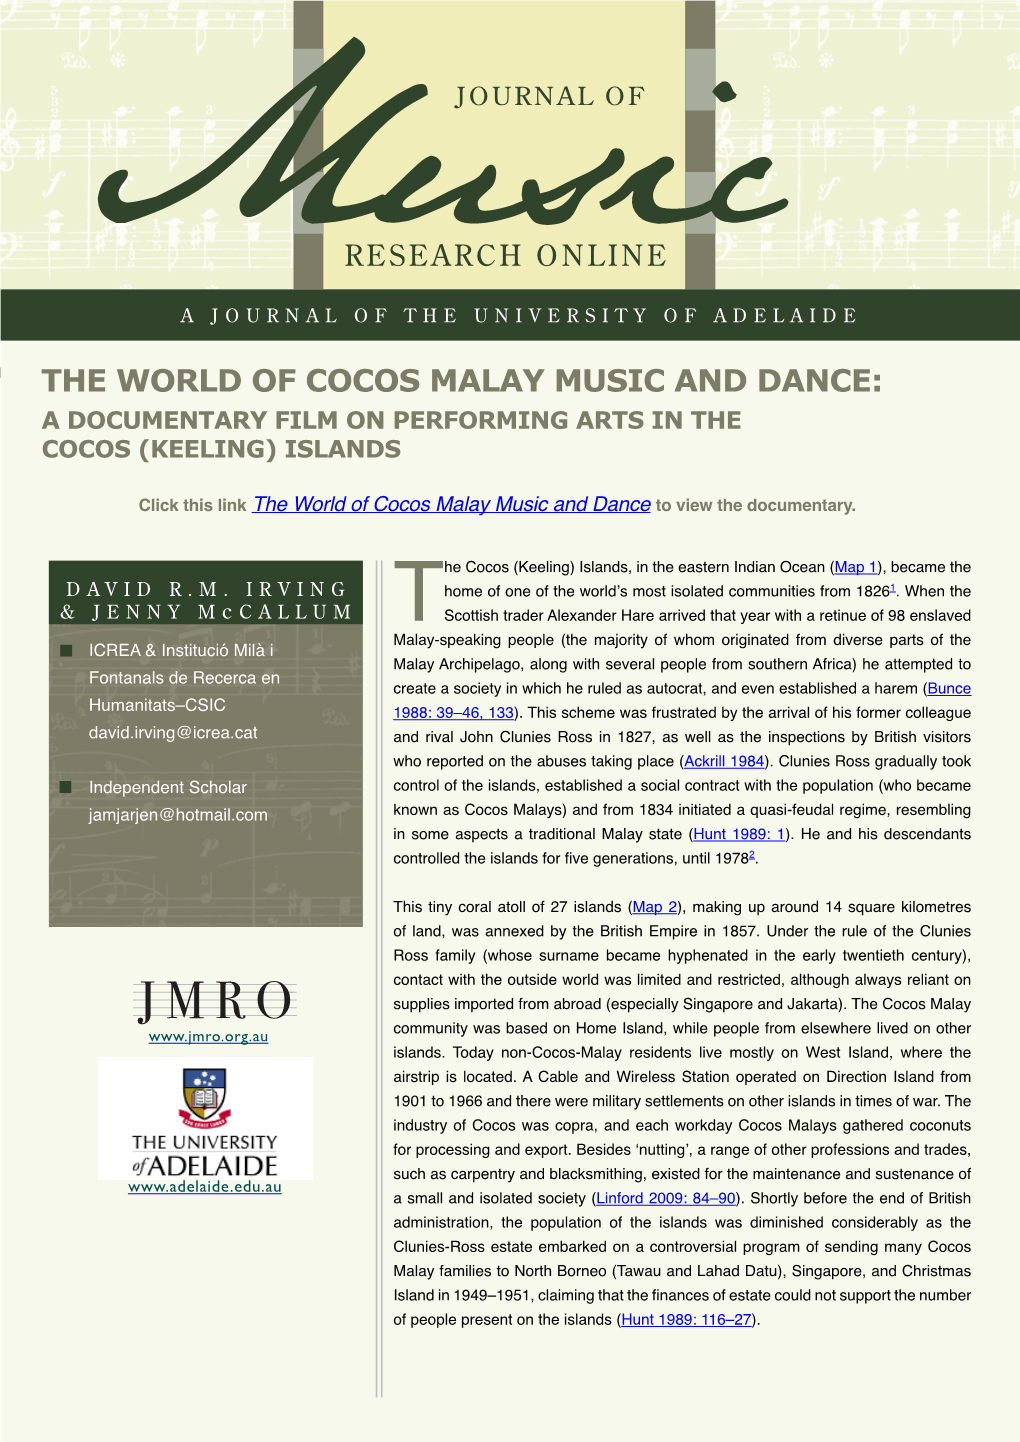 The World of Cocos Malay Music and Dance: a Documentary Film on Performing Arts in the Cocos (Keeling) Islands